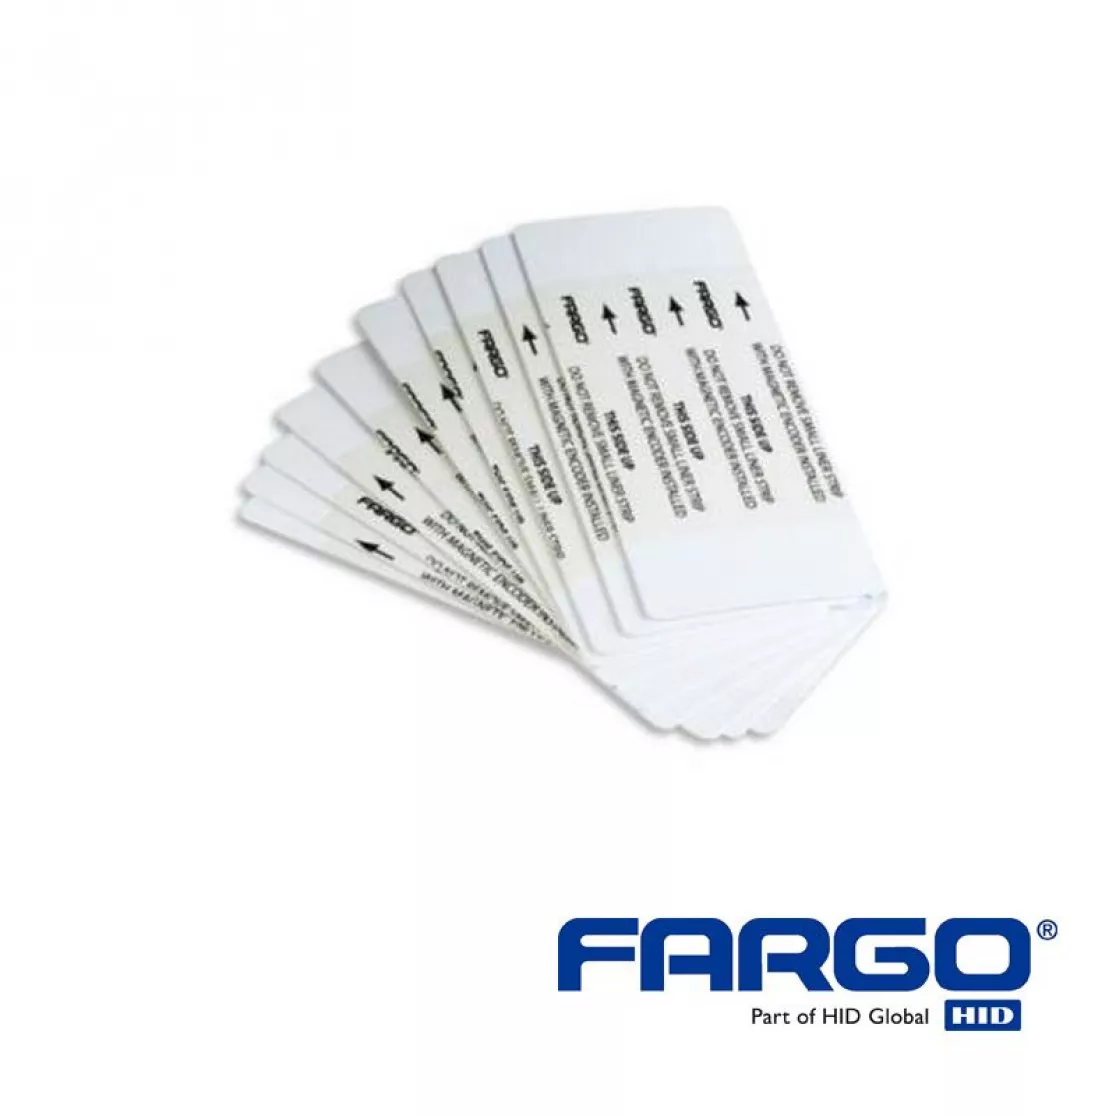 Cleaning card double-sided for hid fargo DTC4500e card printer